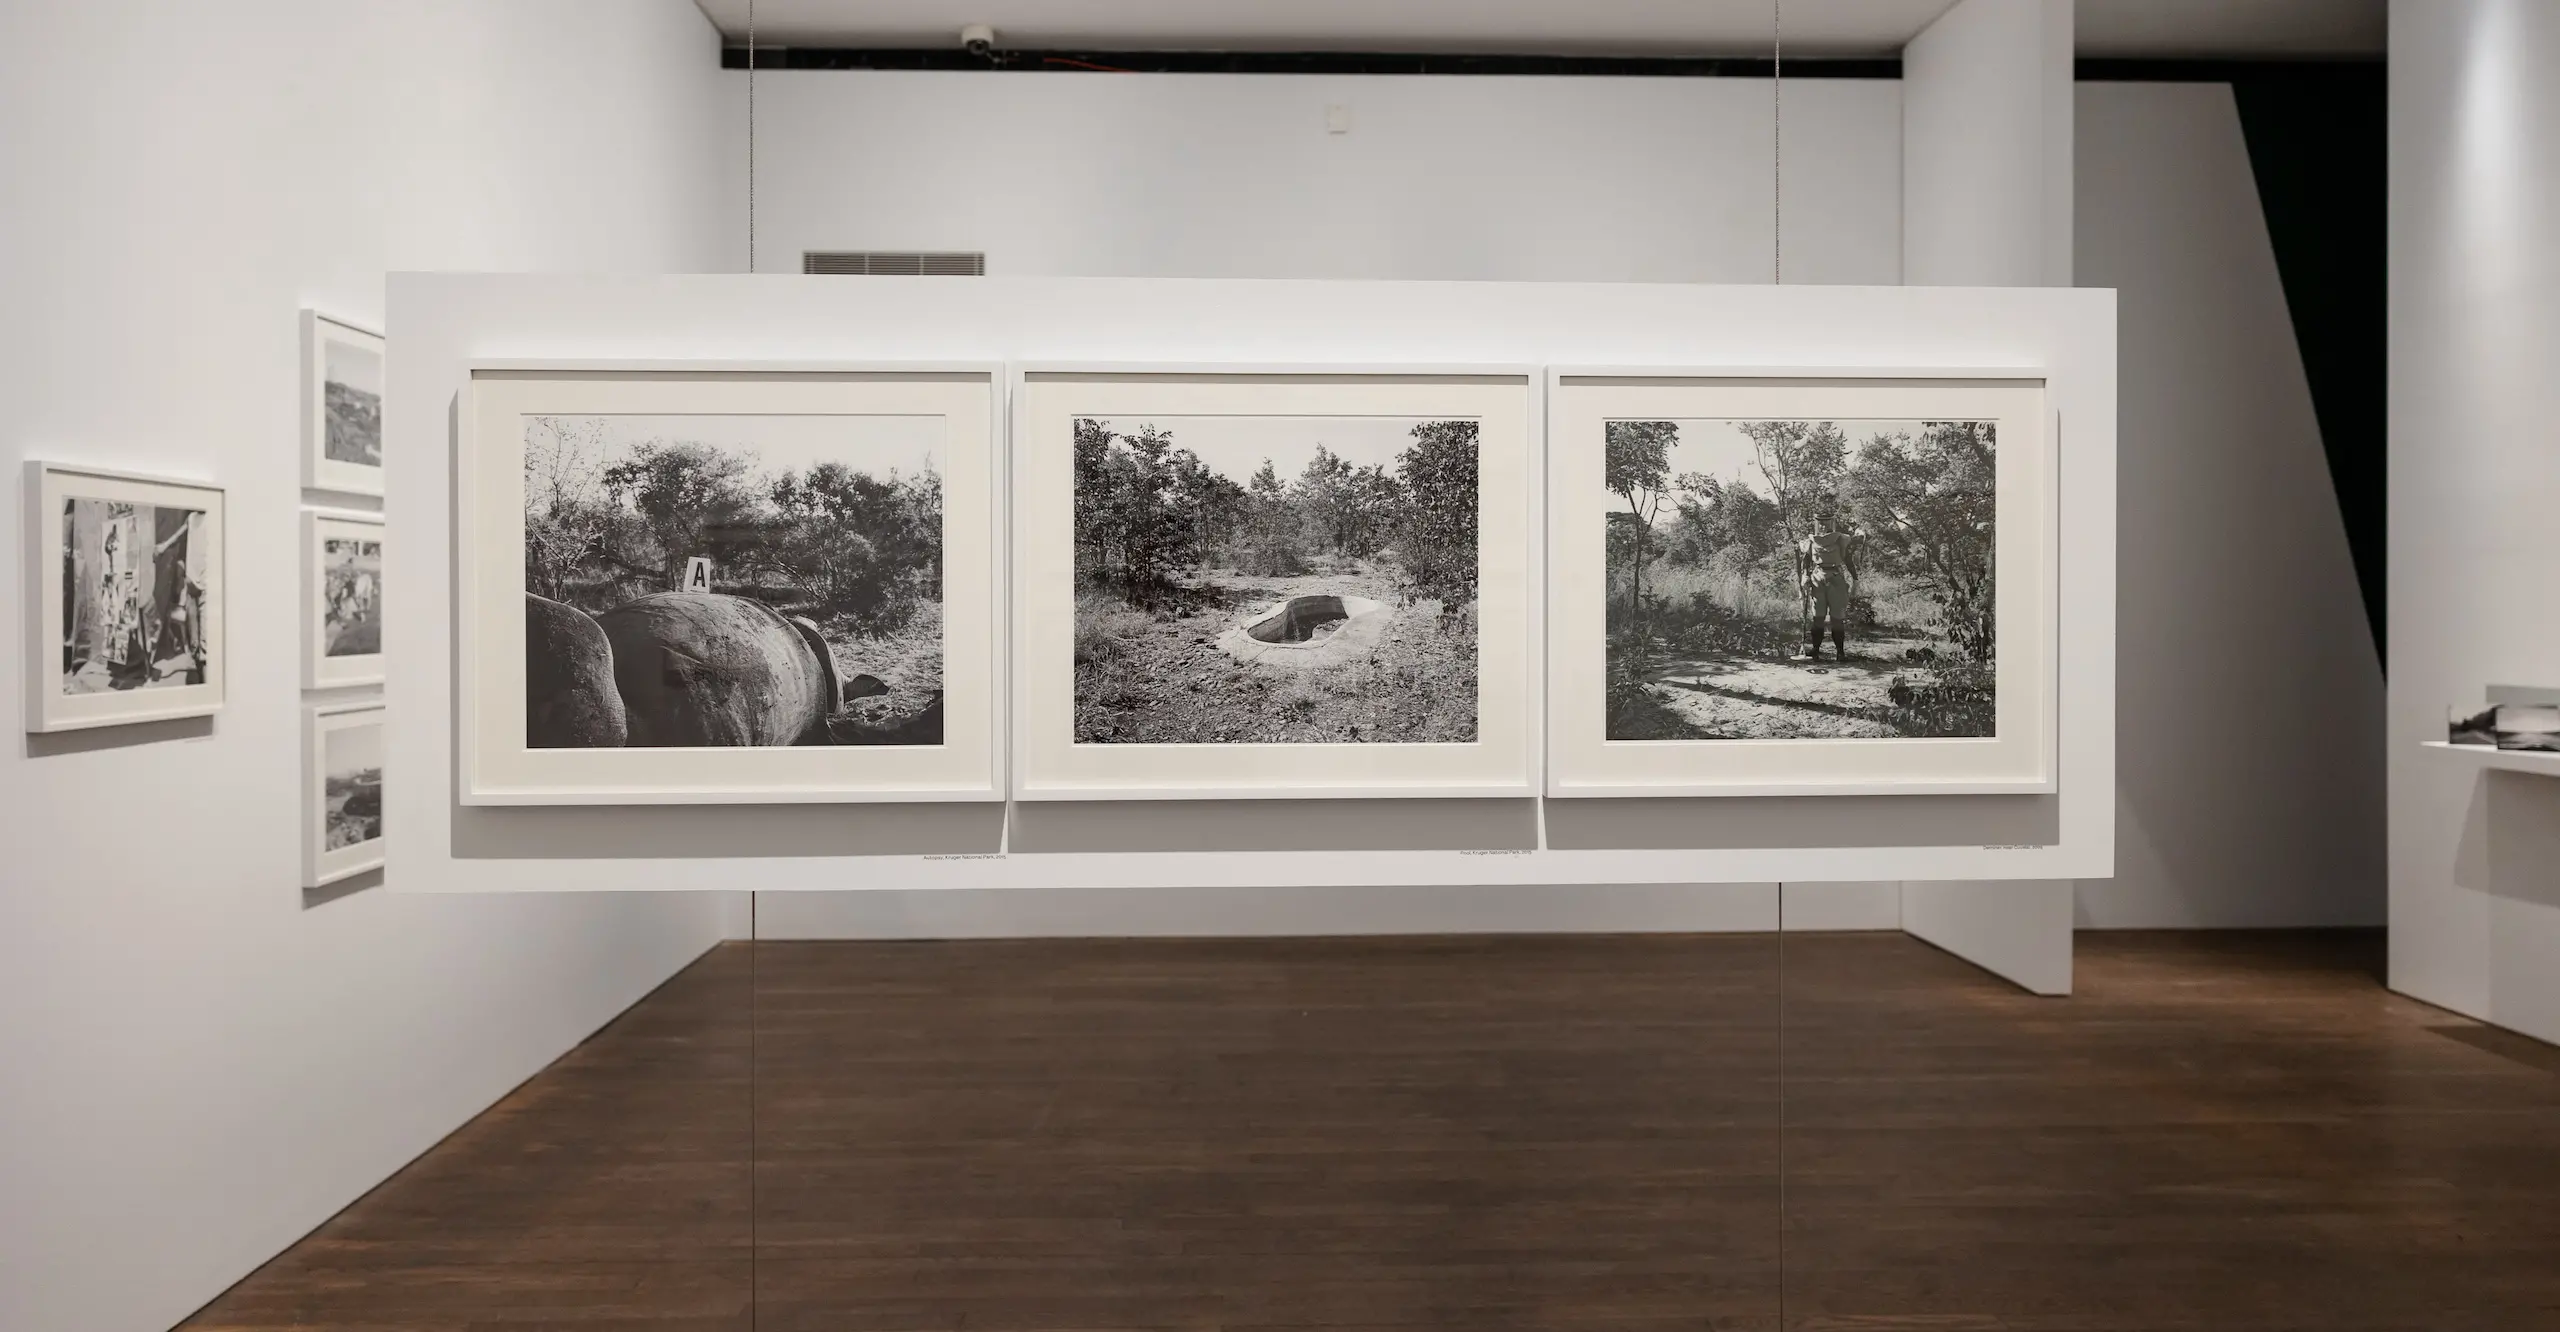 Black and white landscape photographs displayed in an exhibition space.